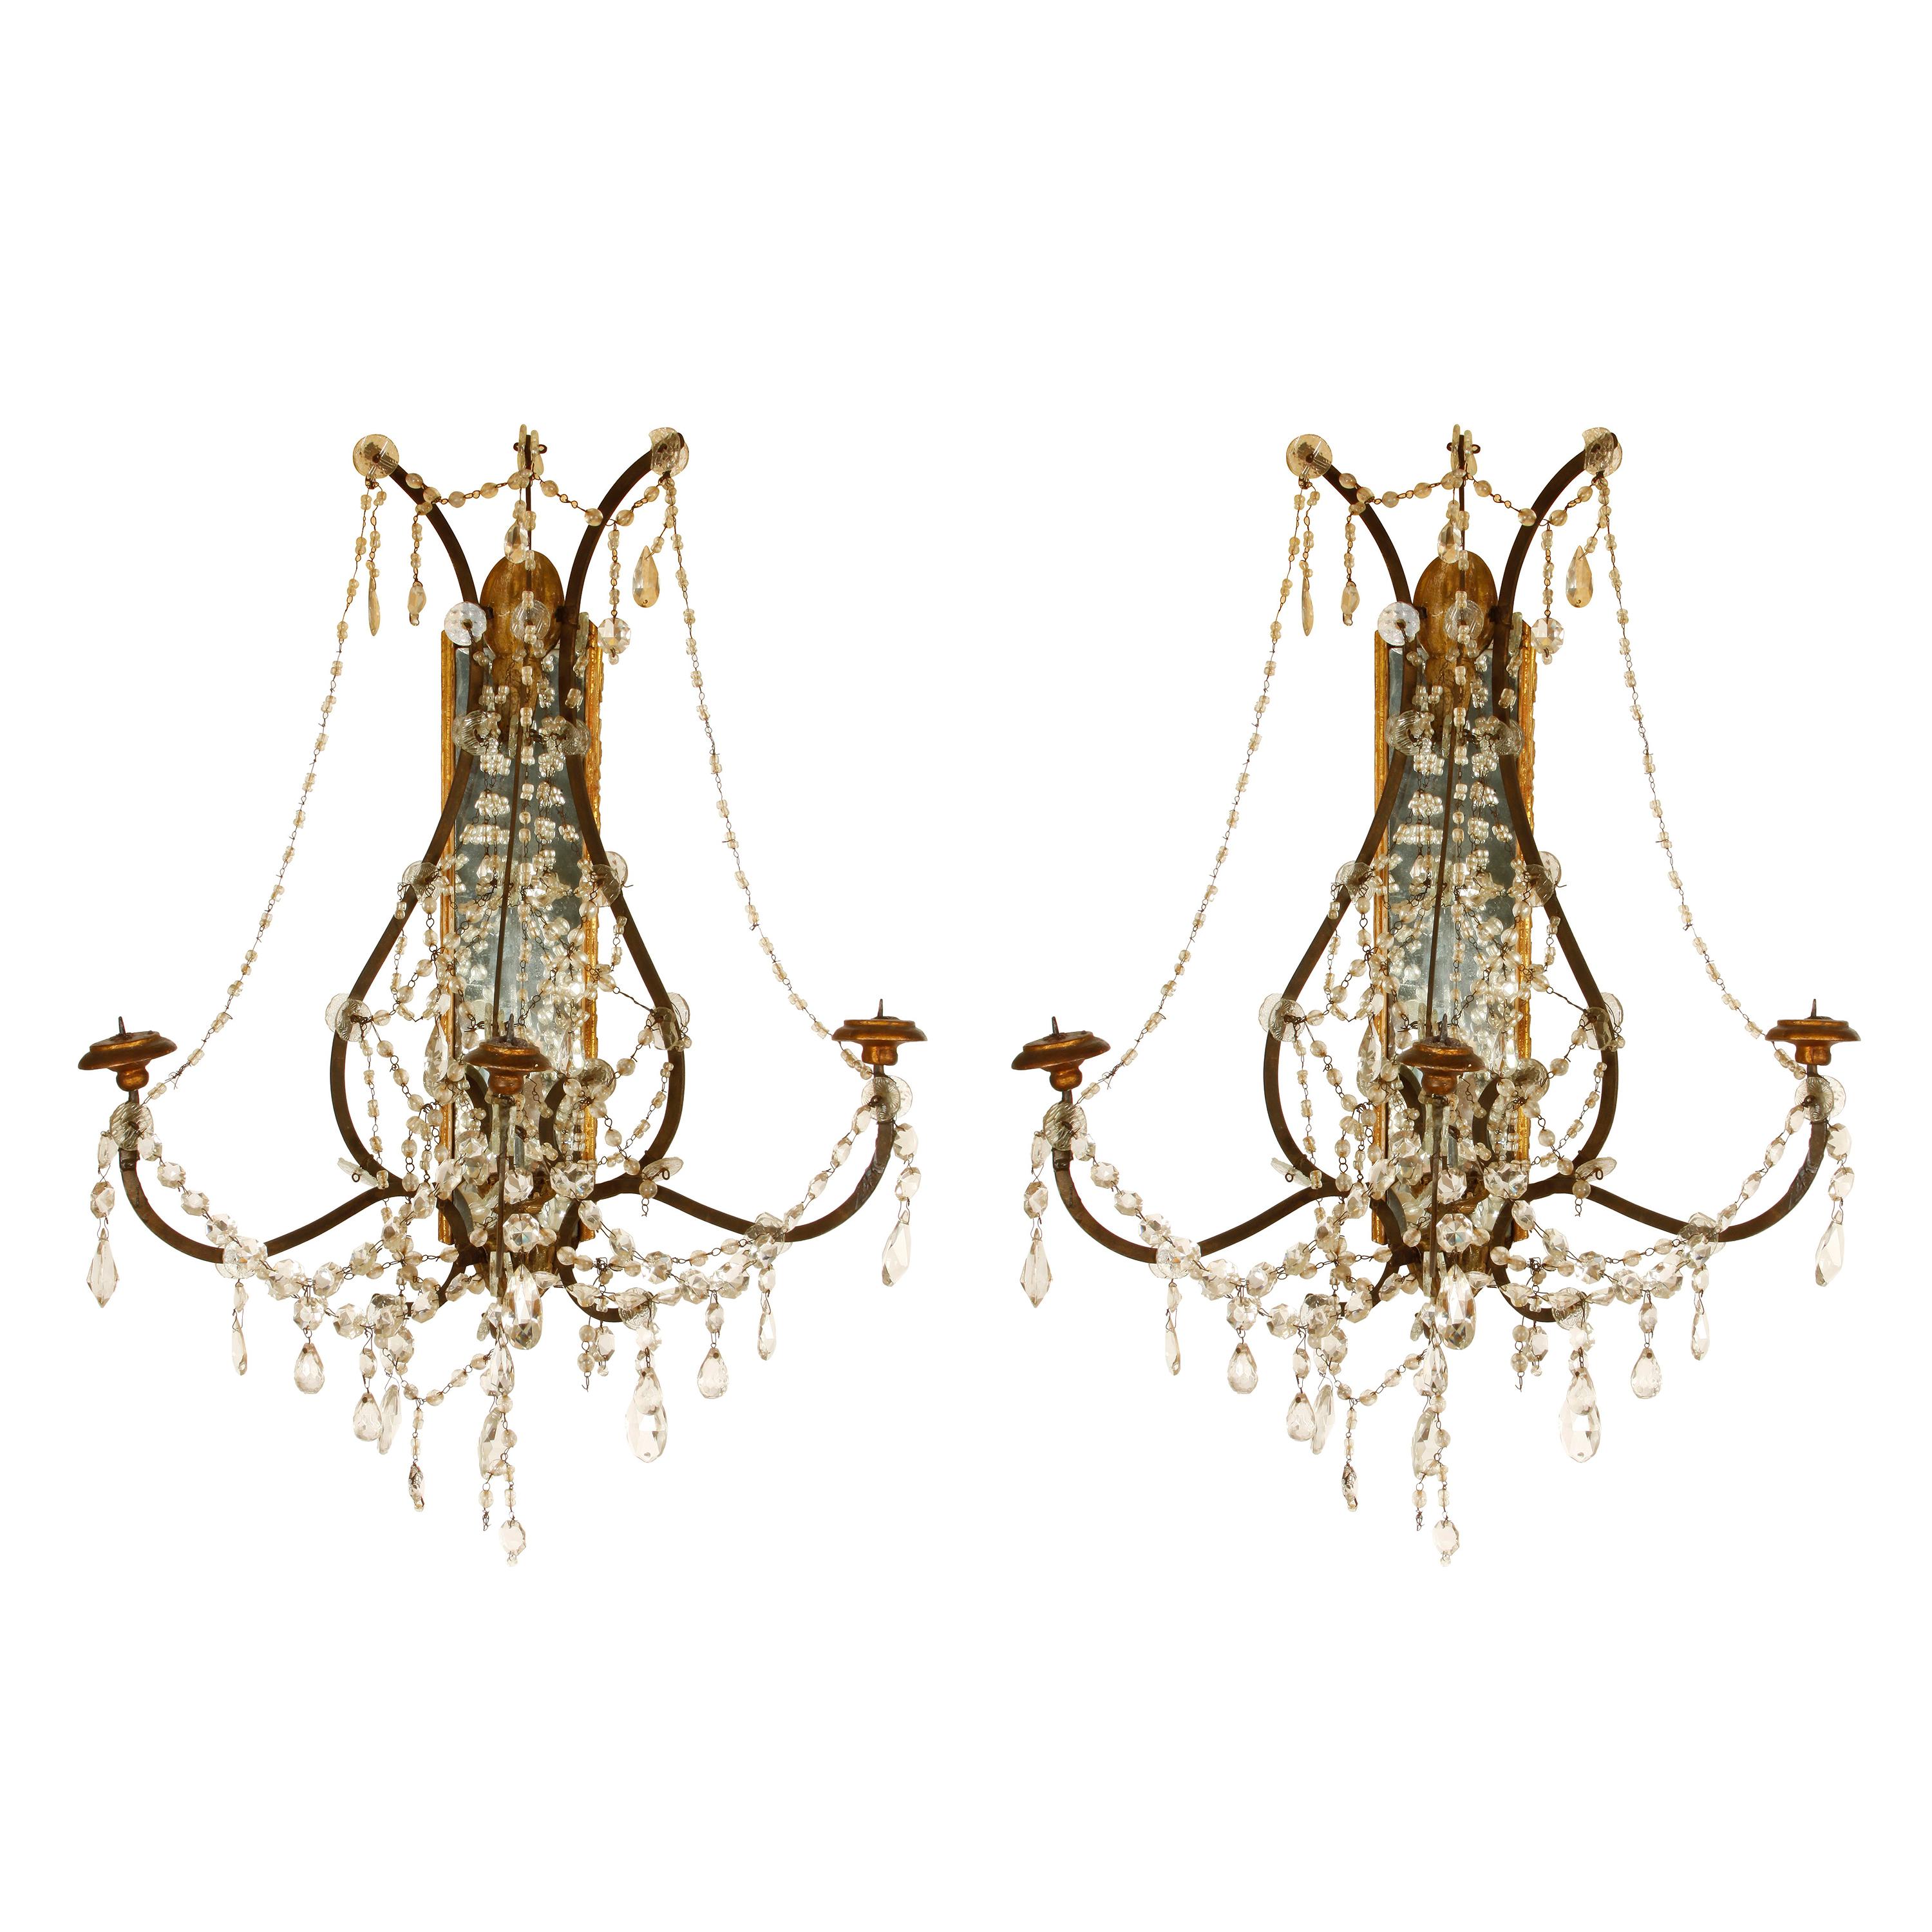 Pair of Continental Giltwood Wrought Iron Mirror Back Sconces